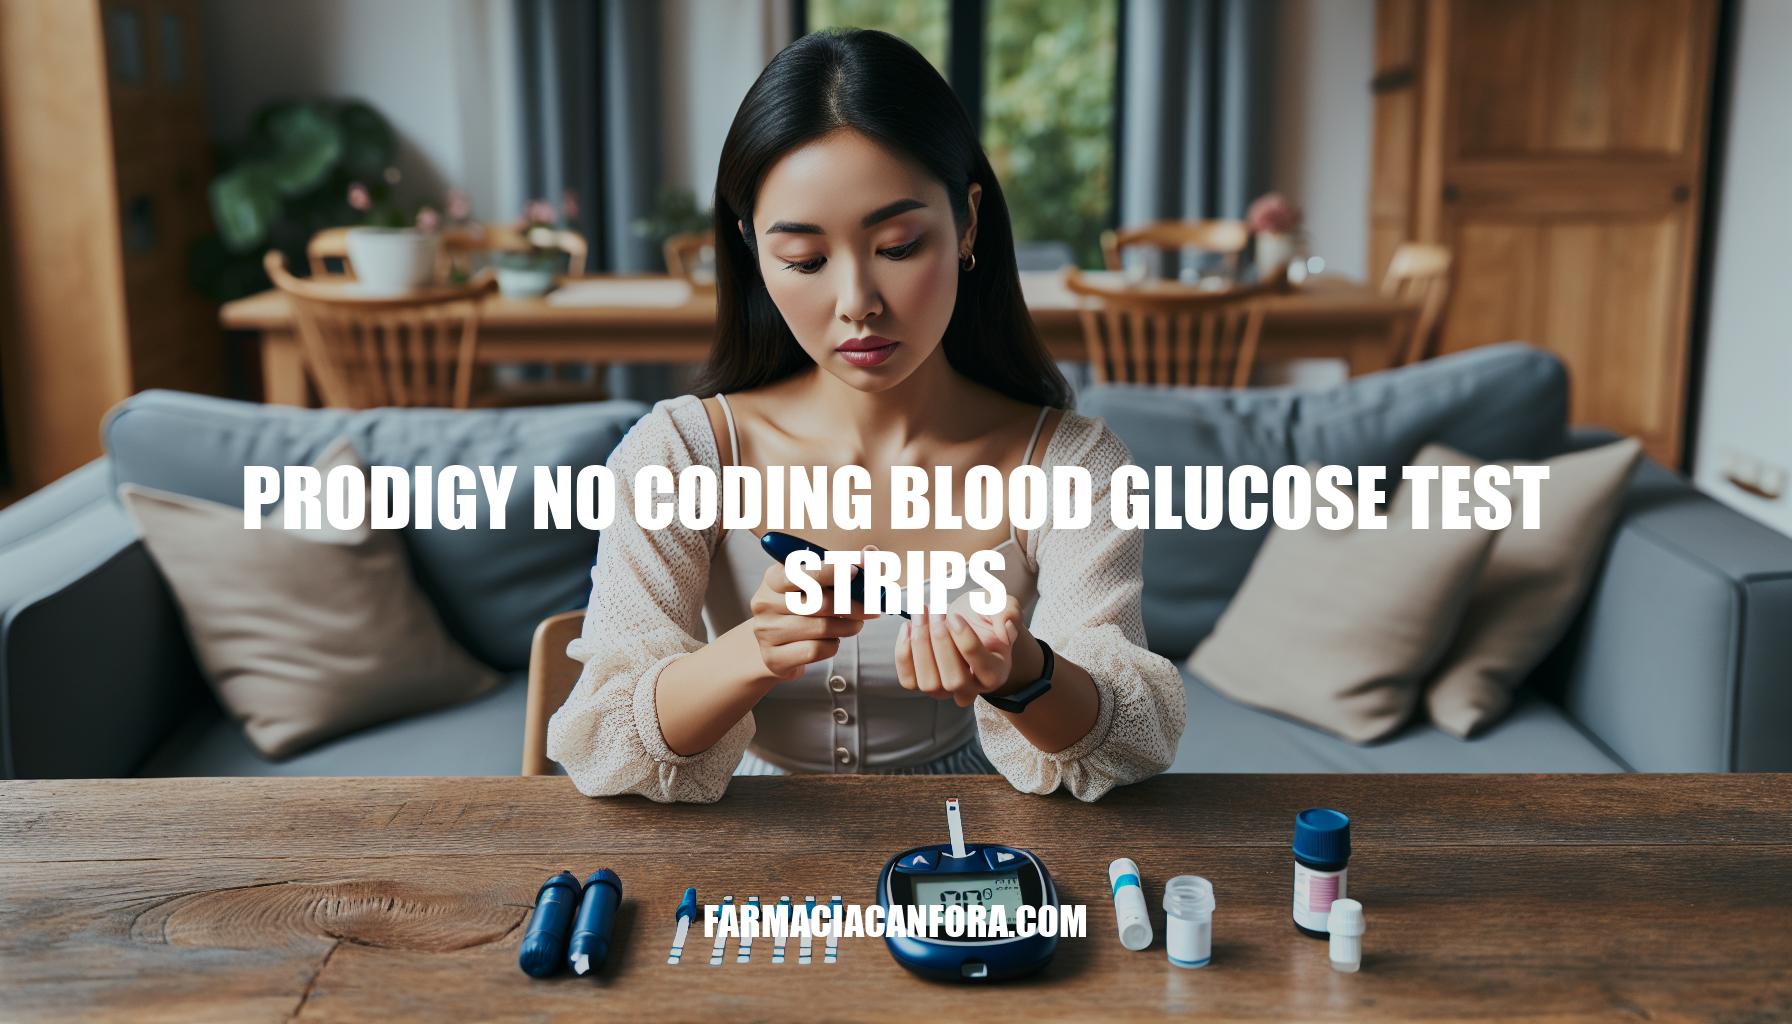 Everything You Need to Know About Prodigy No Coding Blood Glucose Test Strips